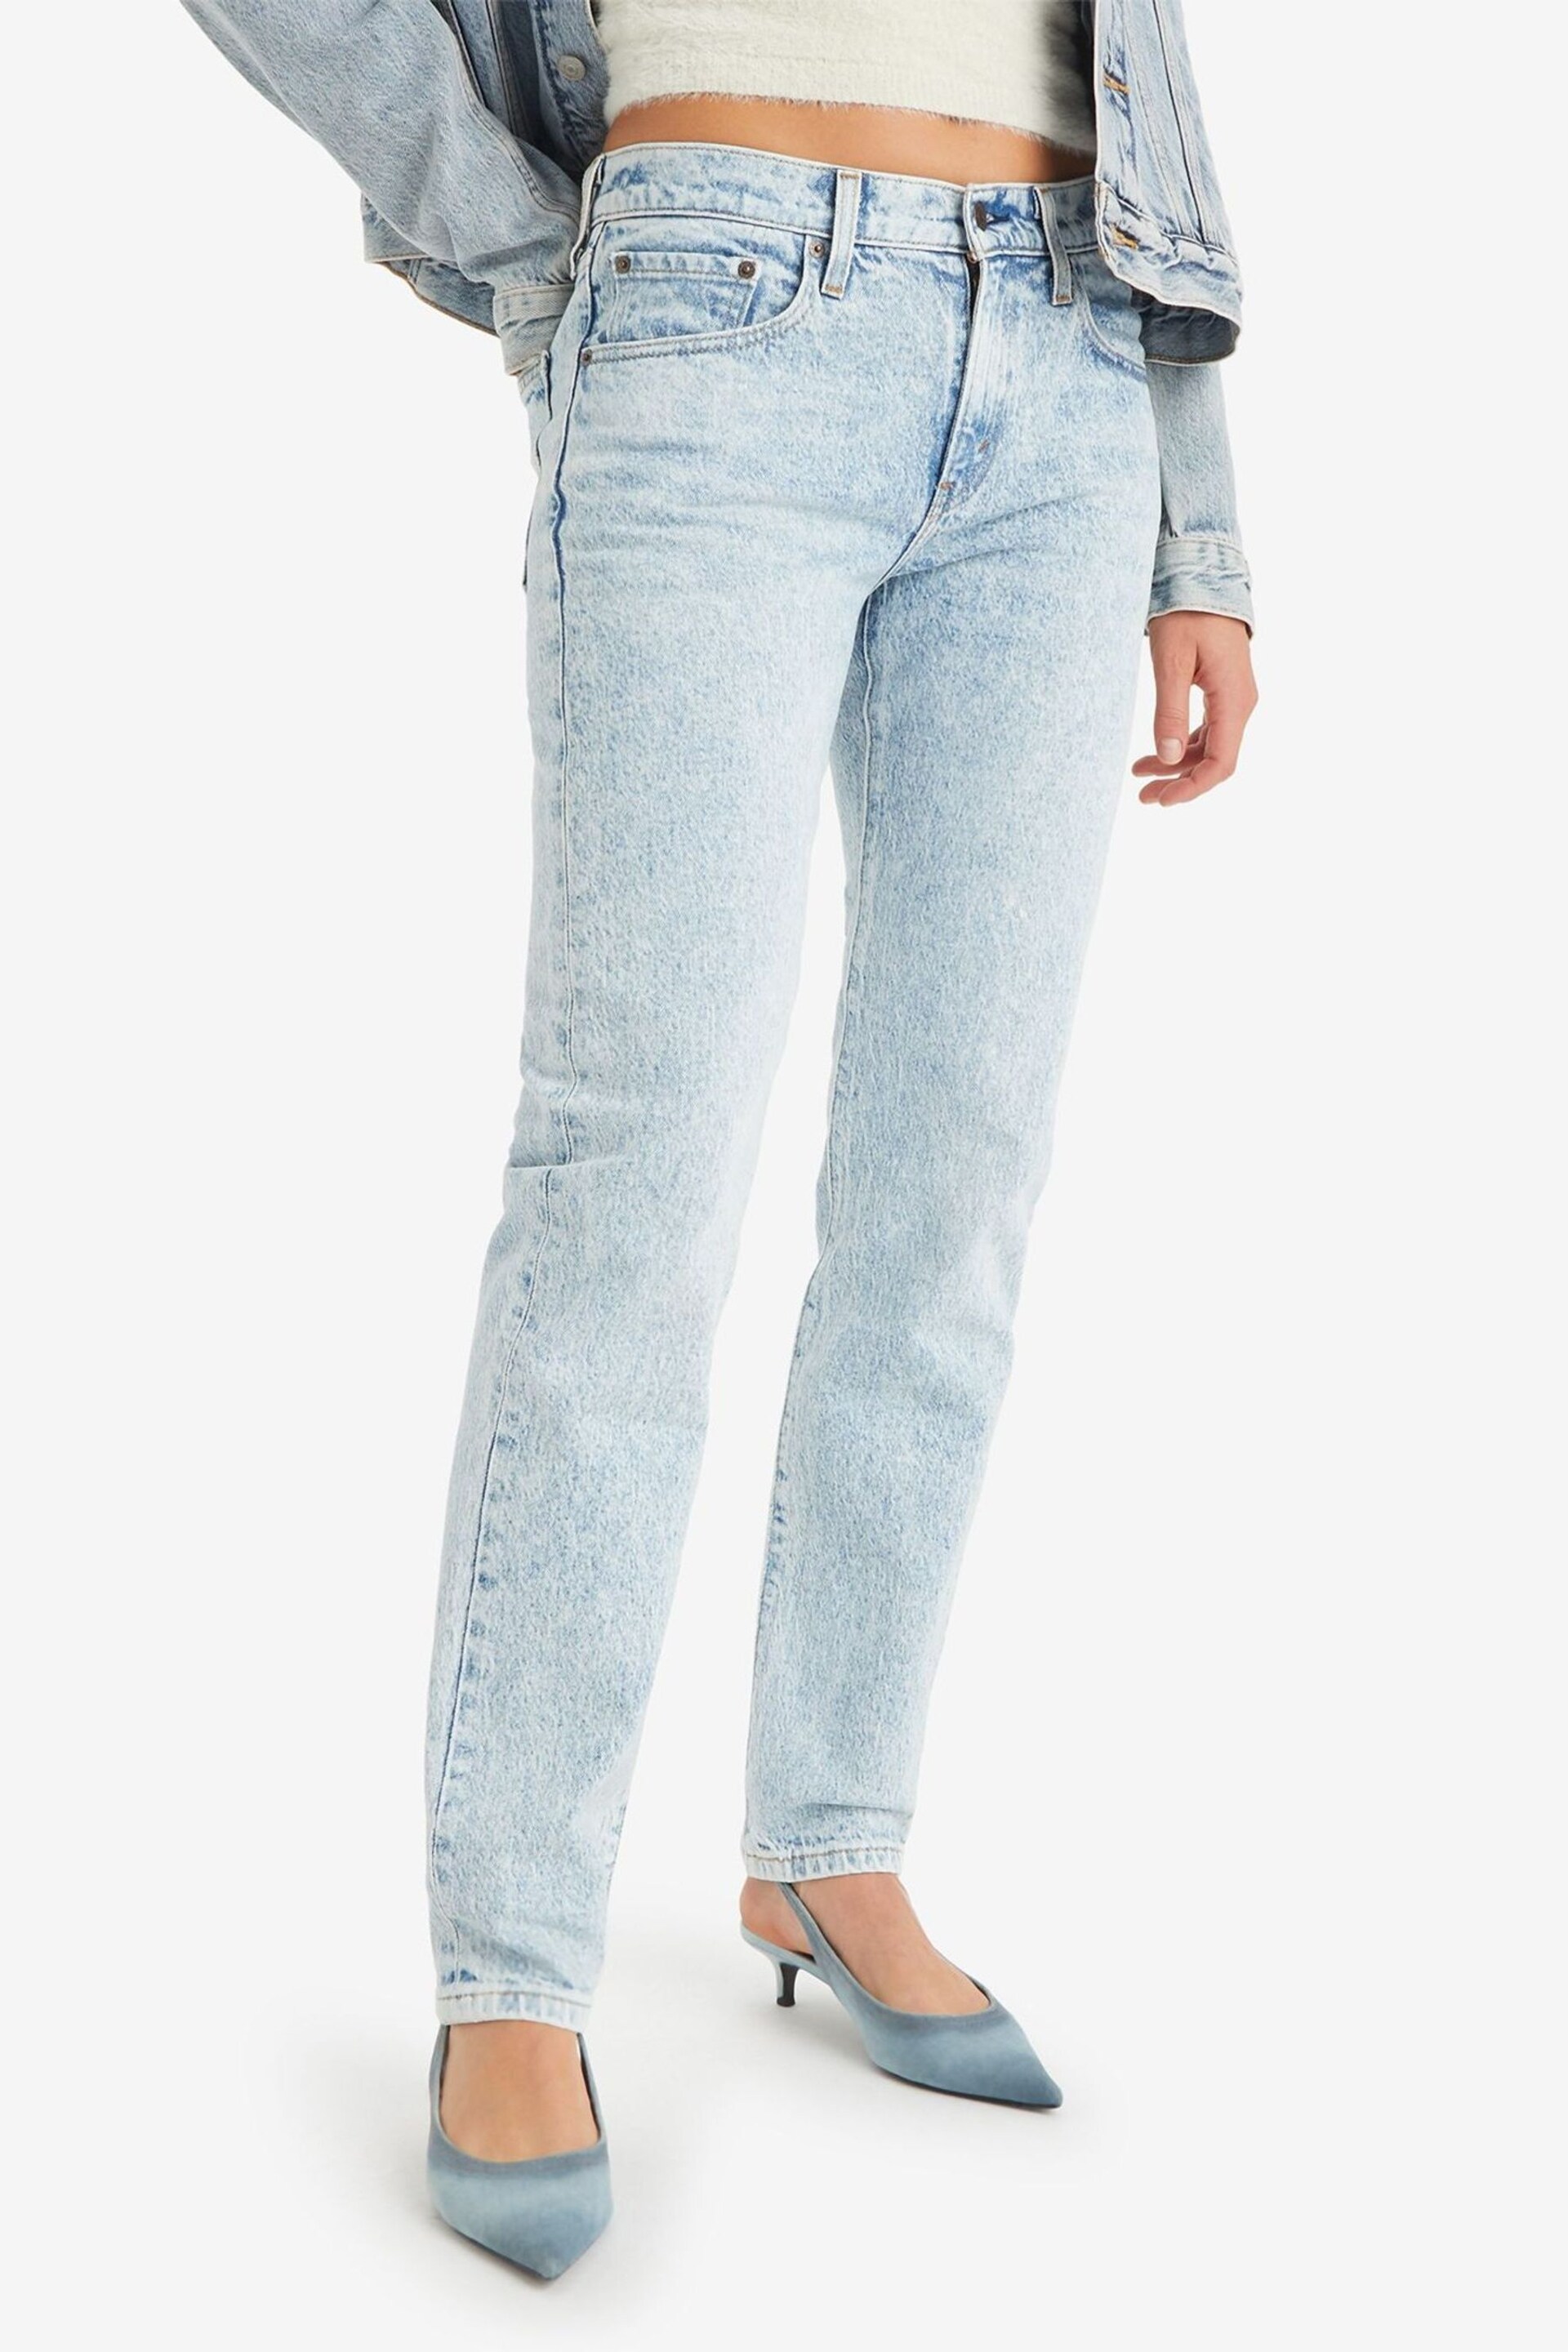 Levi's® That’s Fashion Middy Straight Jeans - Image 1 of 7